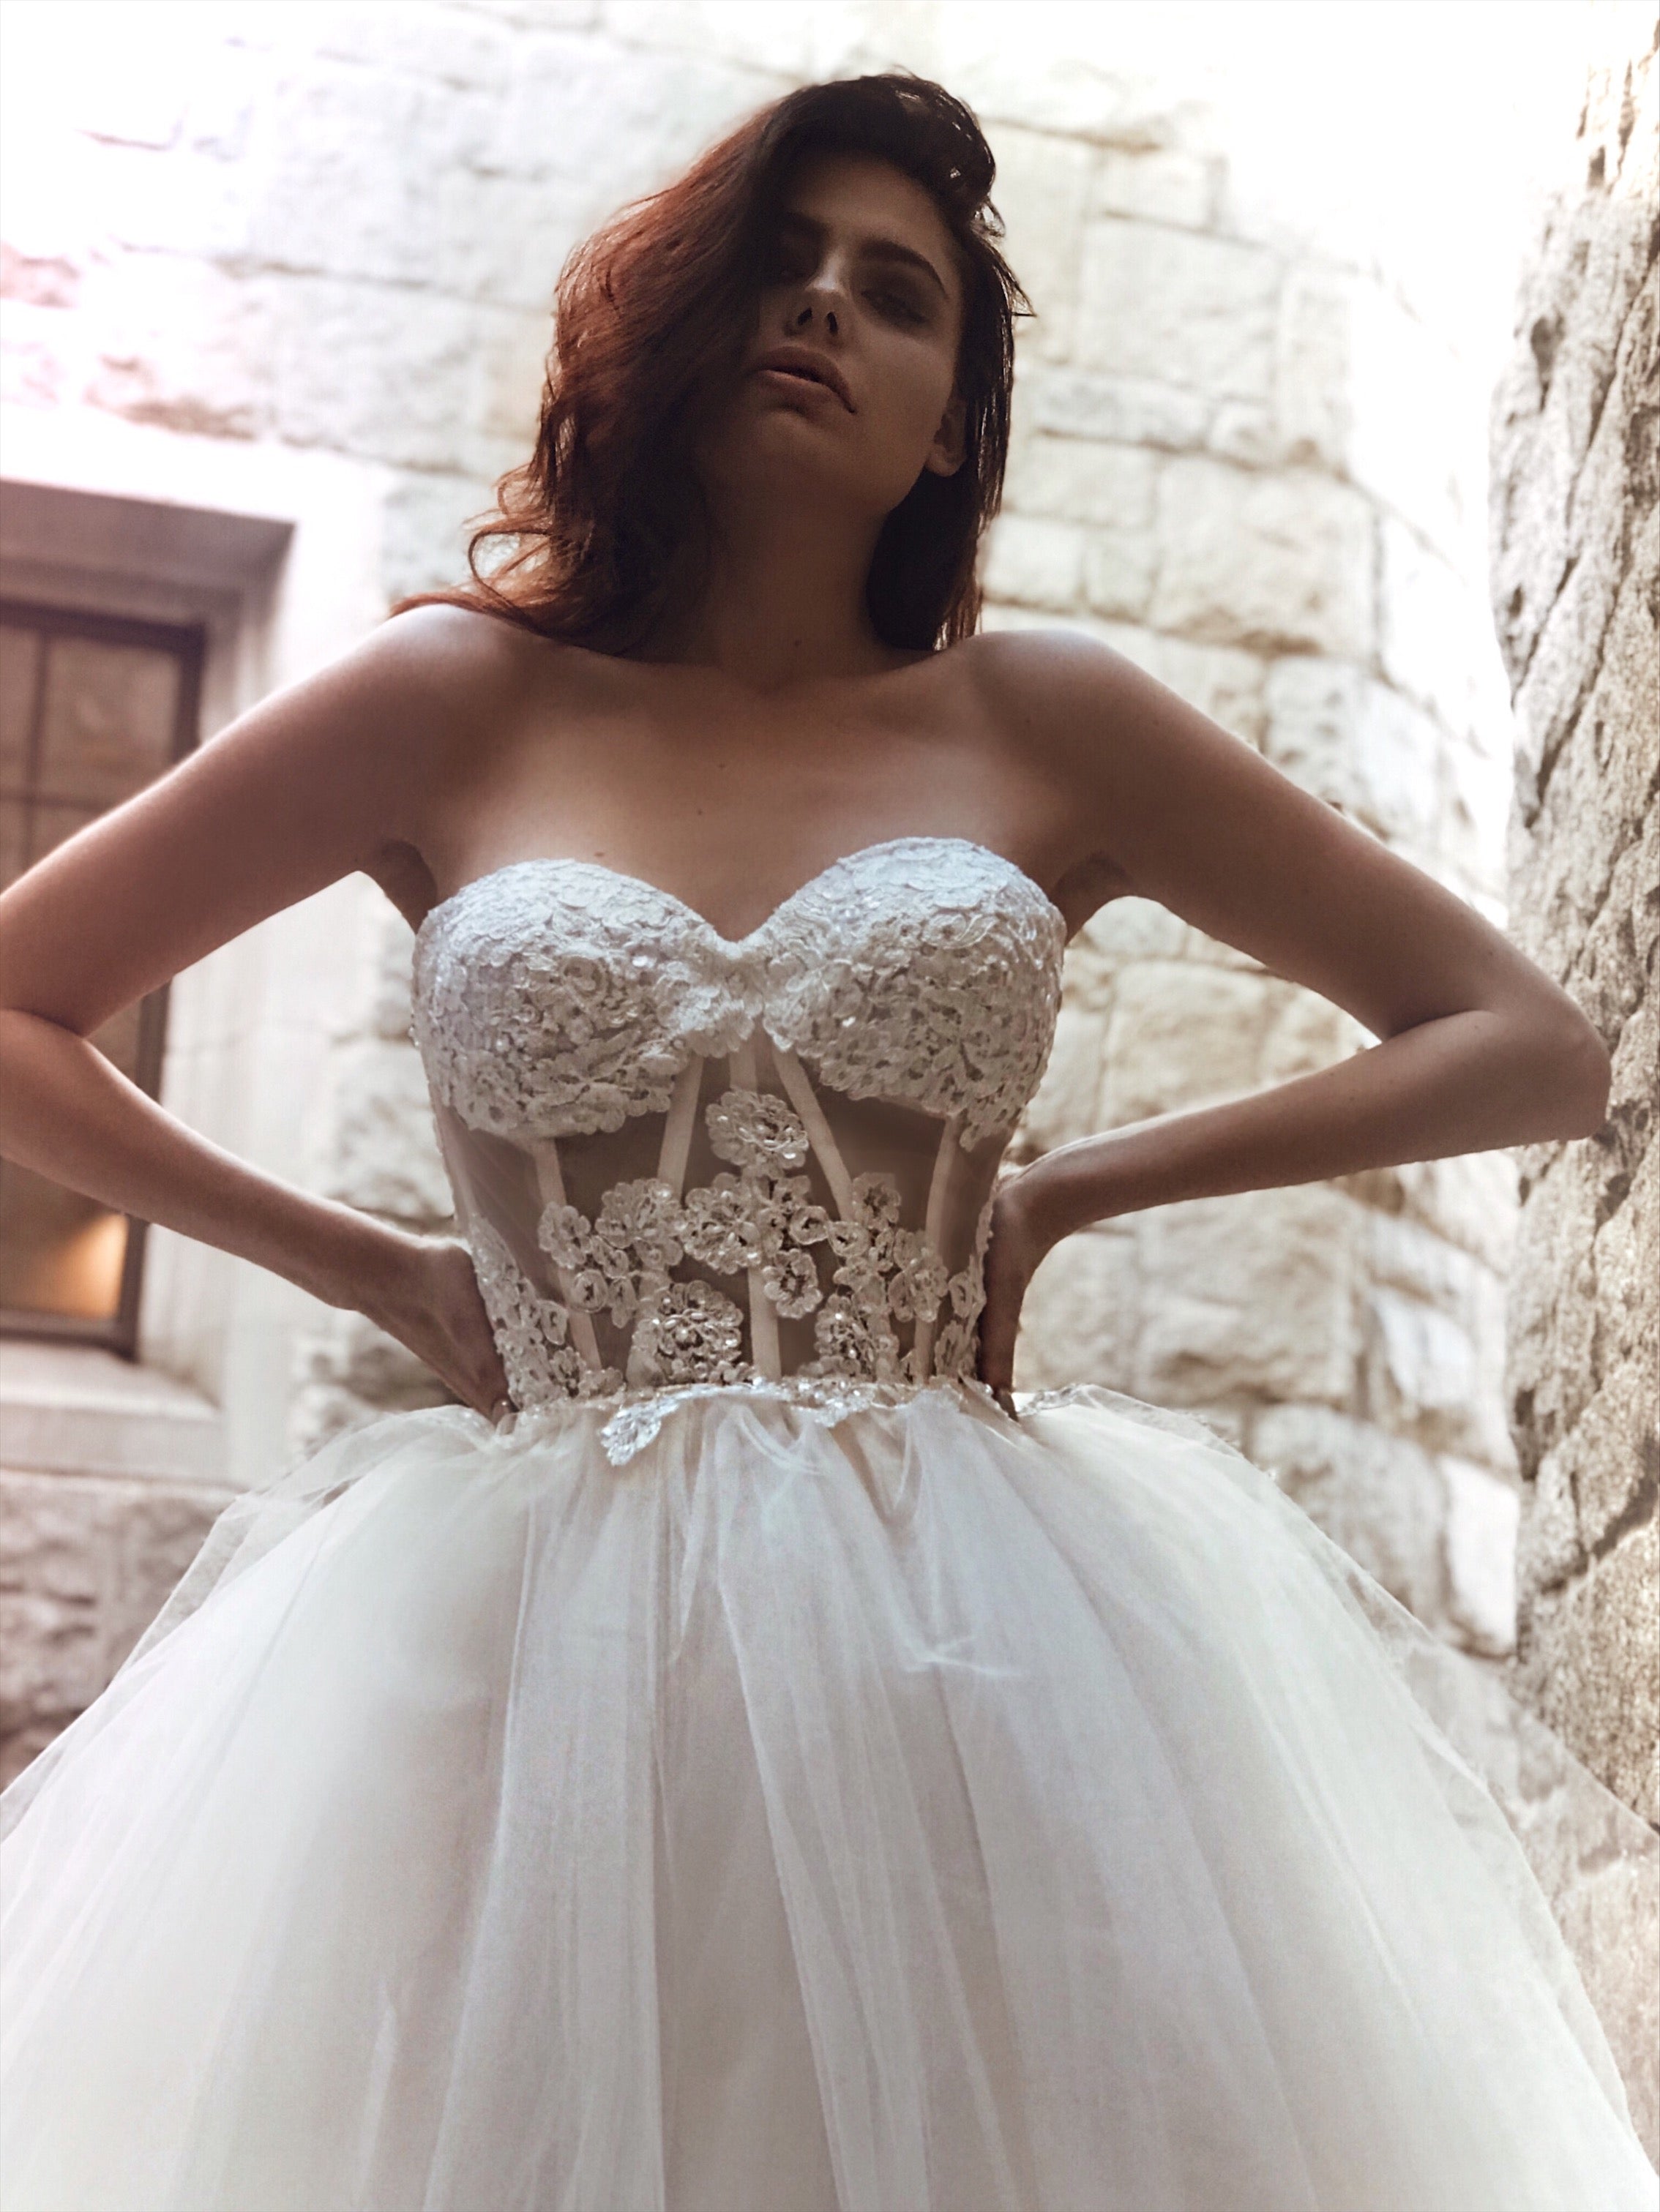 GWEN / Strapless Wedding Dress in Pushup Bustier Style - LaceMarry